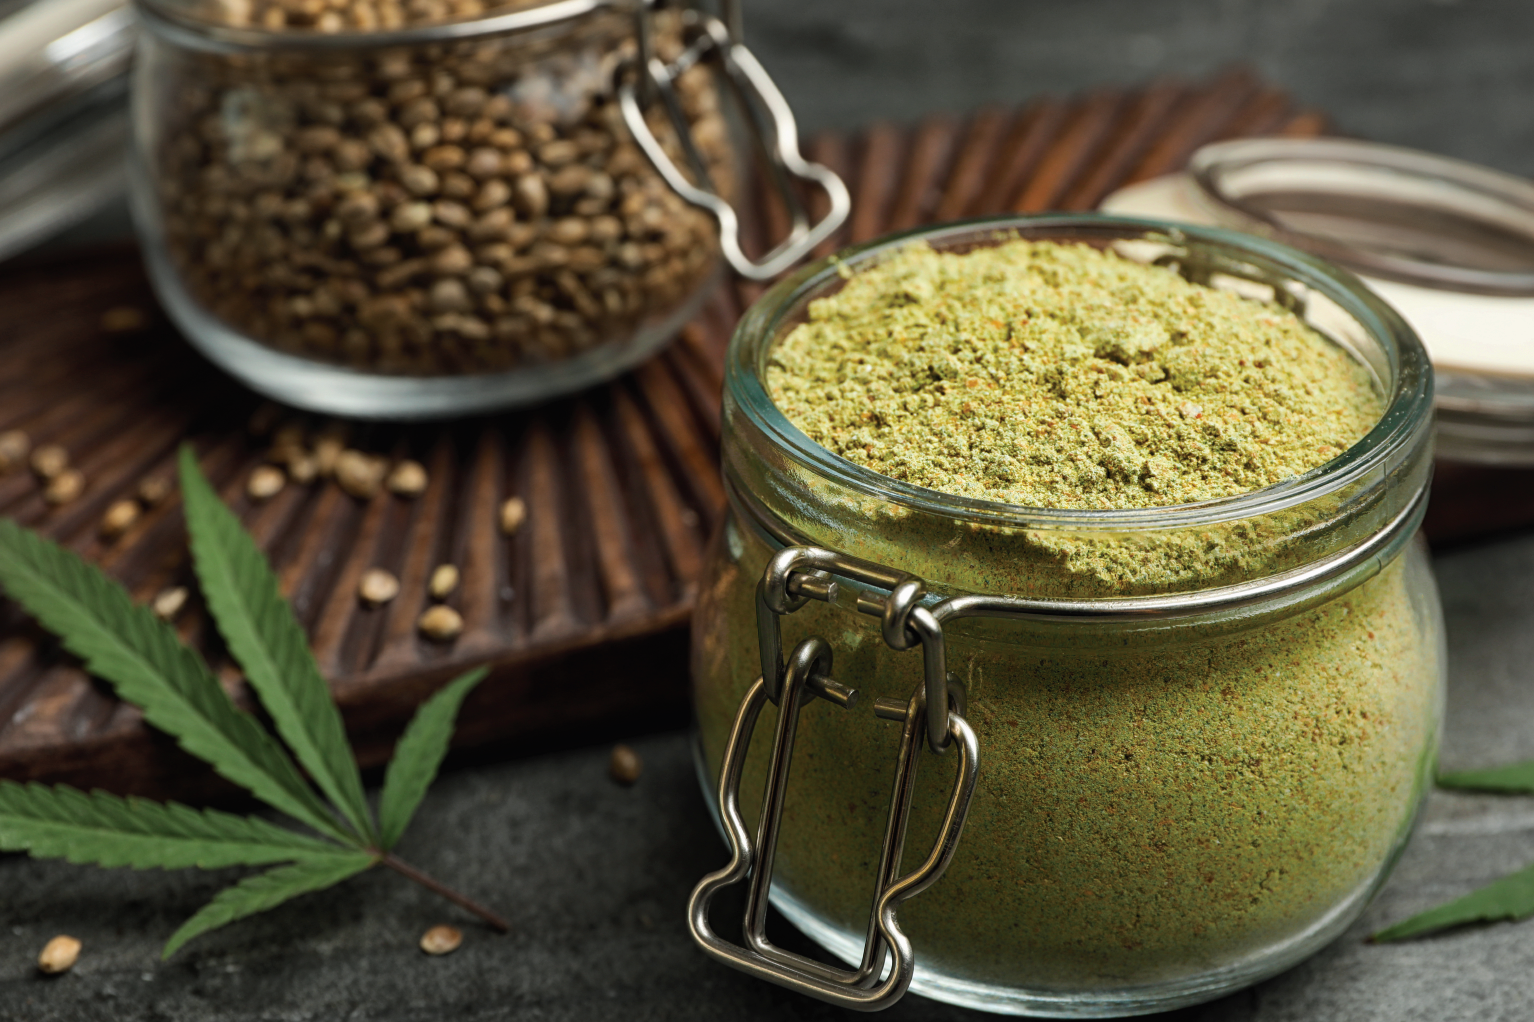 Wondering what cannabis-infused food trends you should have your eye on? Read on to learn how cannabusiness is disrupting the food industry.